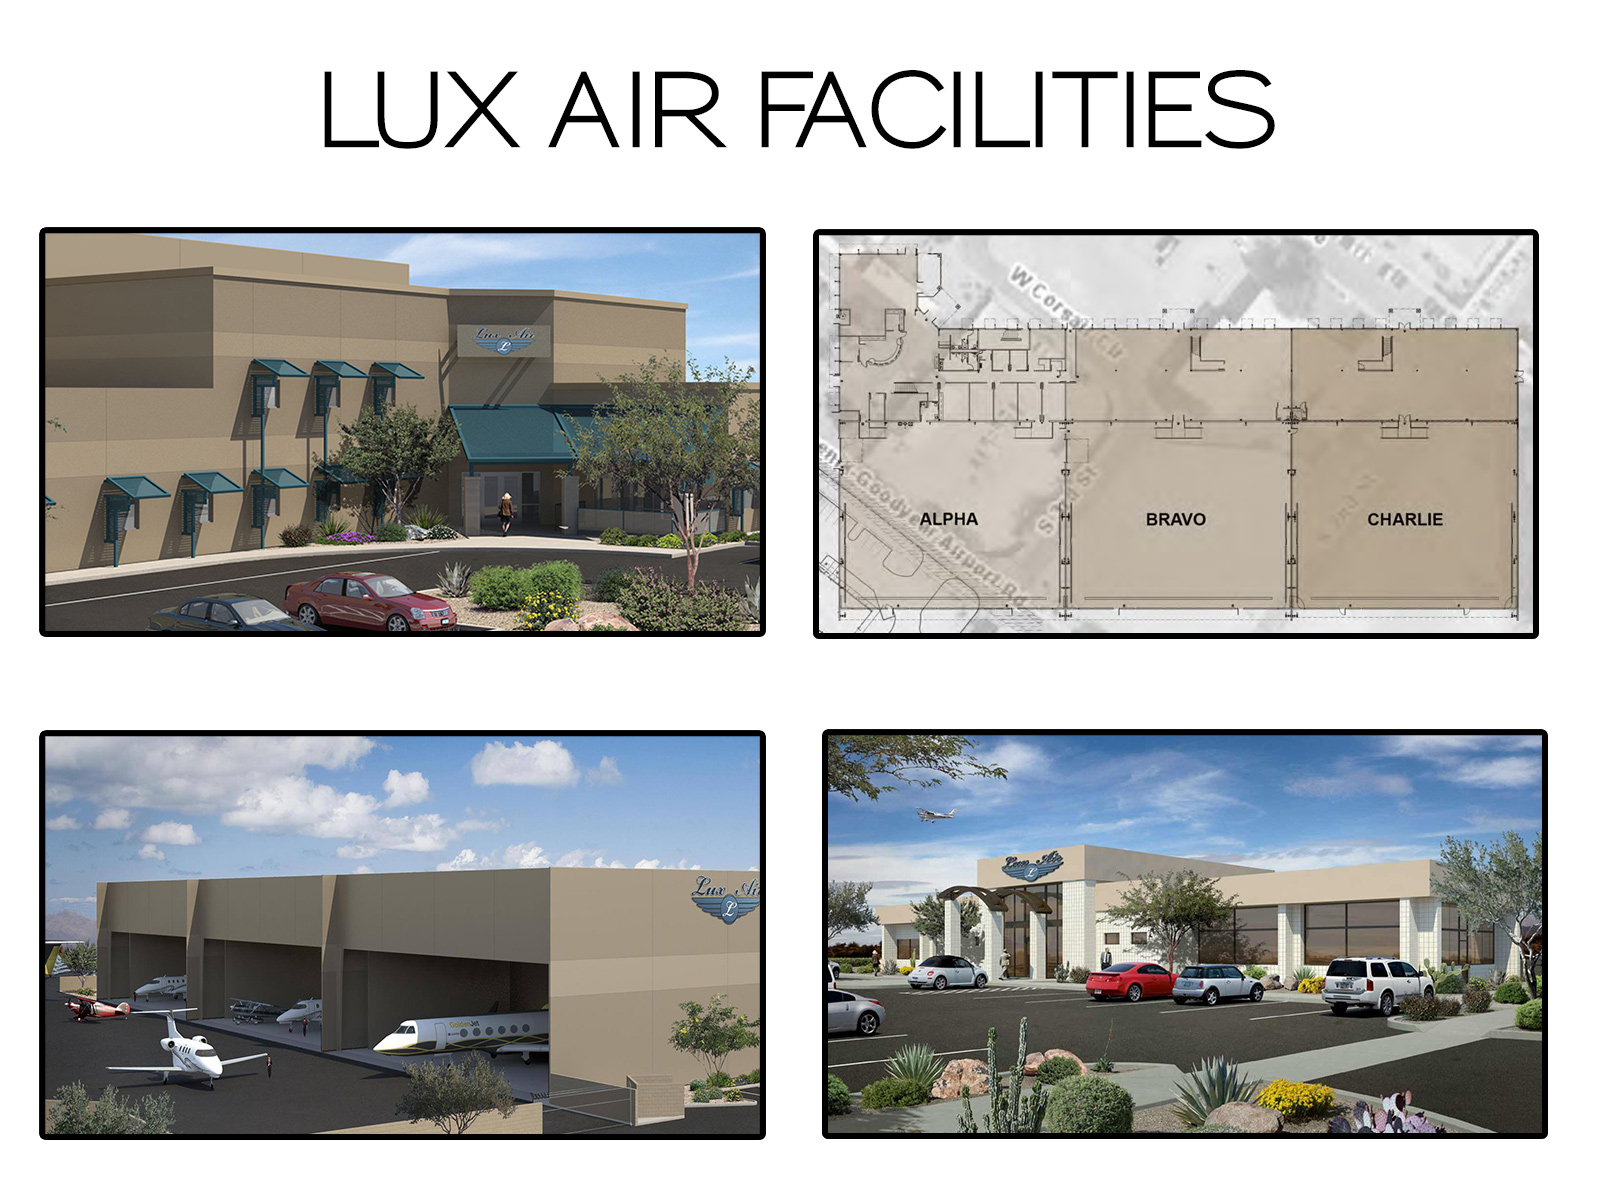 Image of Lux Air Facilities